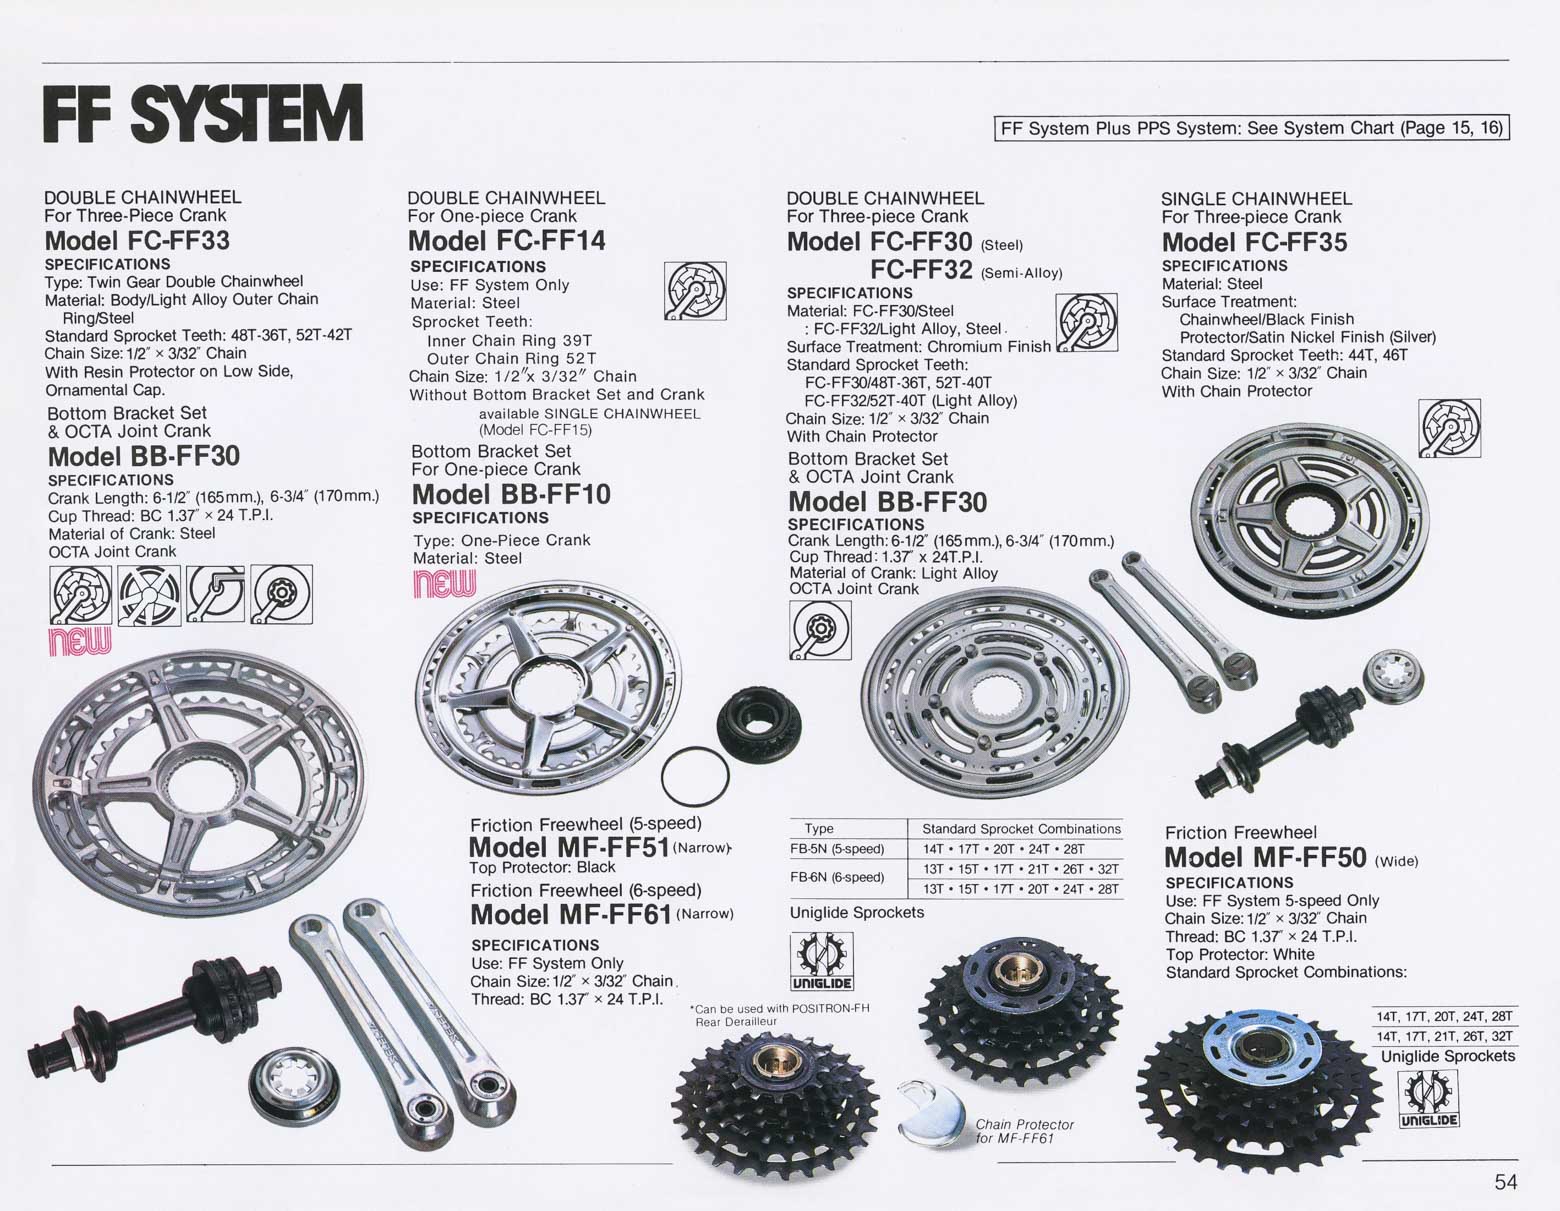 Shimano Bicycle System Components 1981 page 54 main image